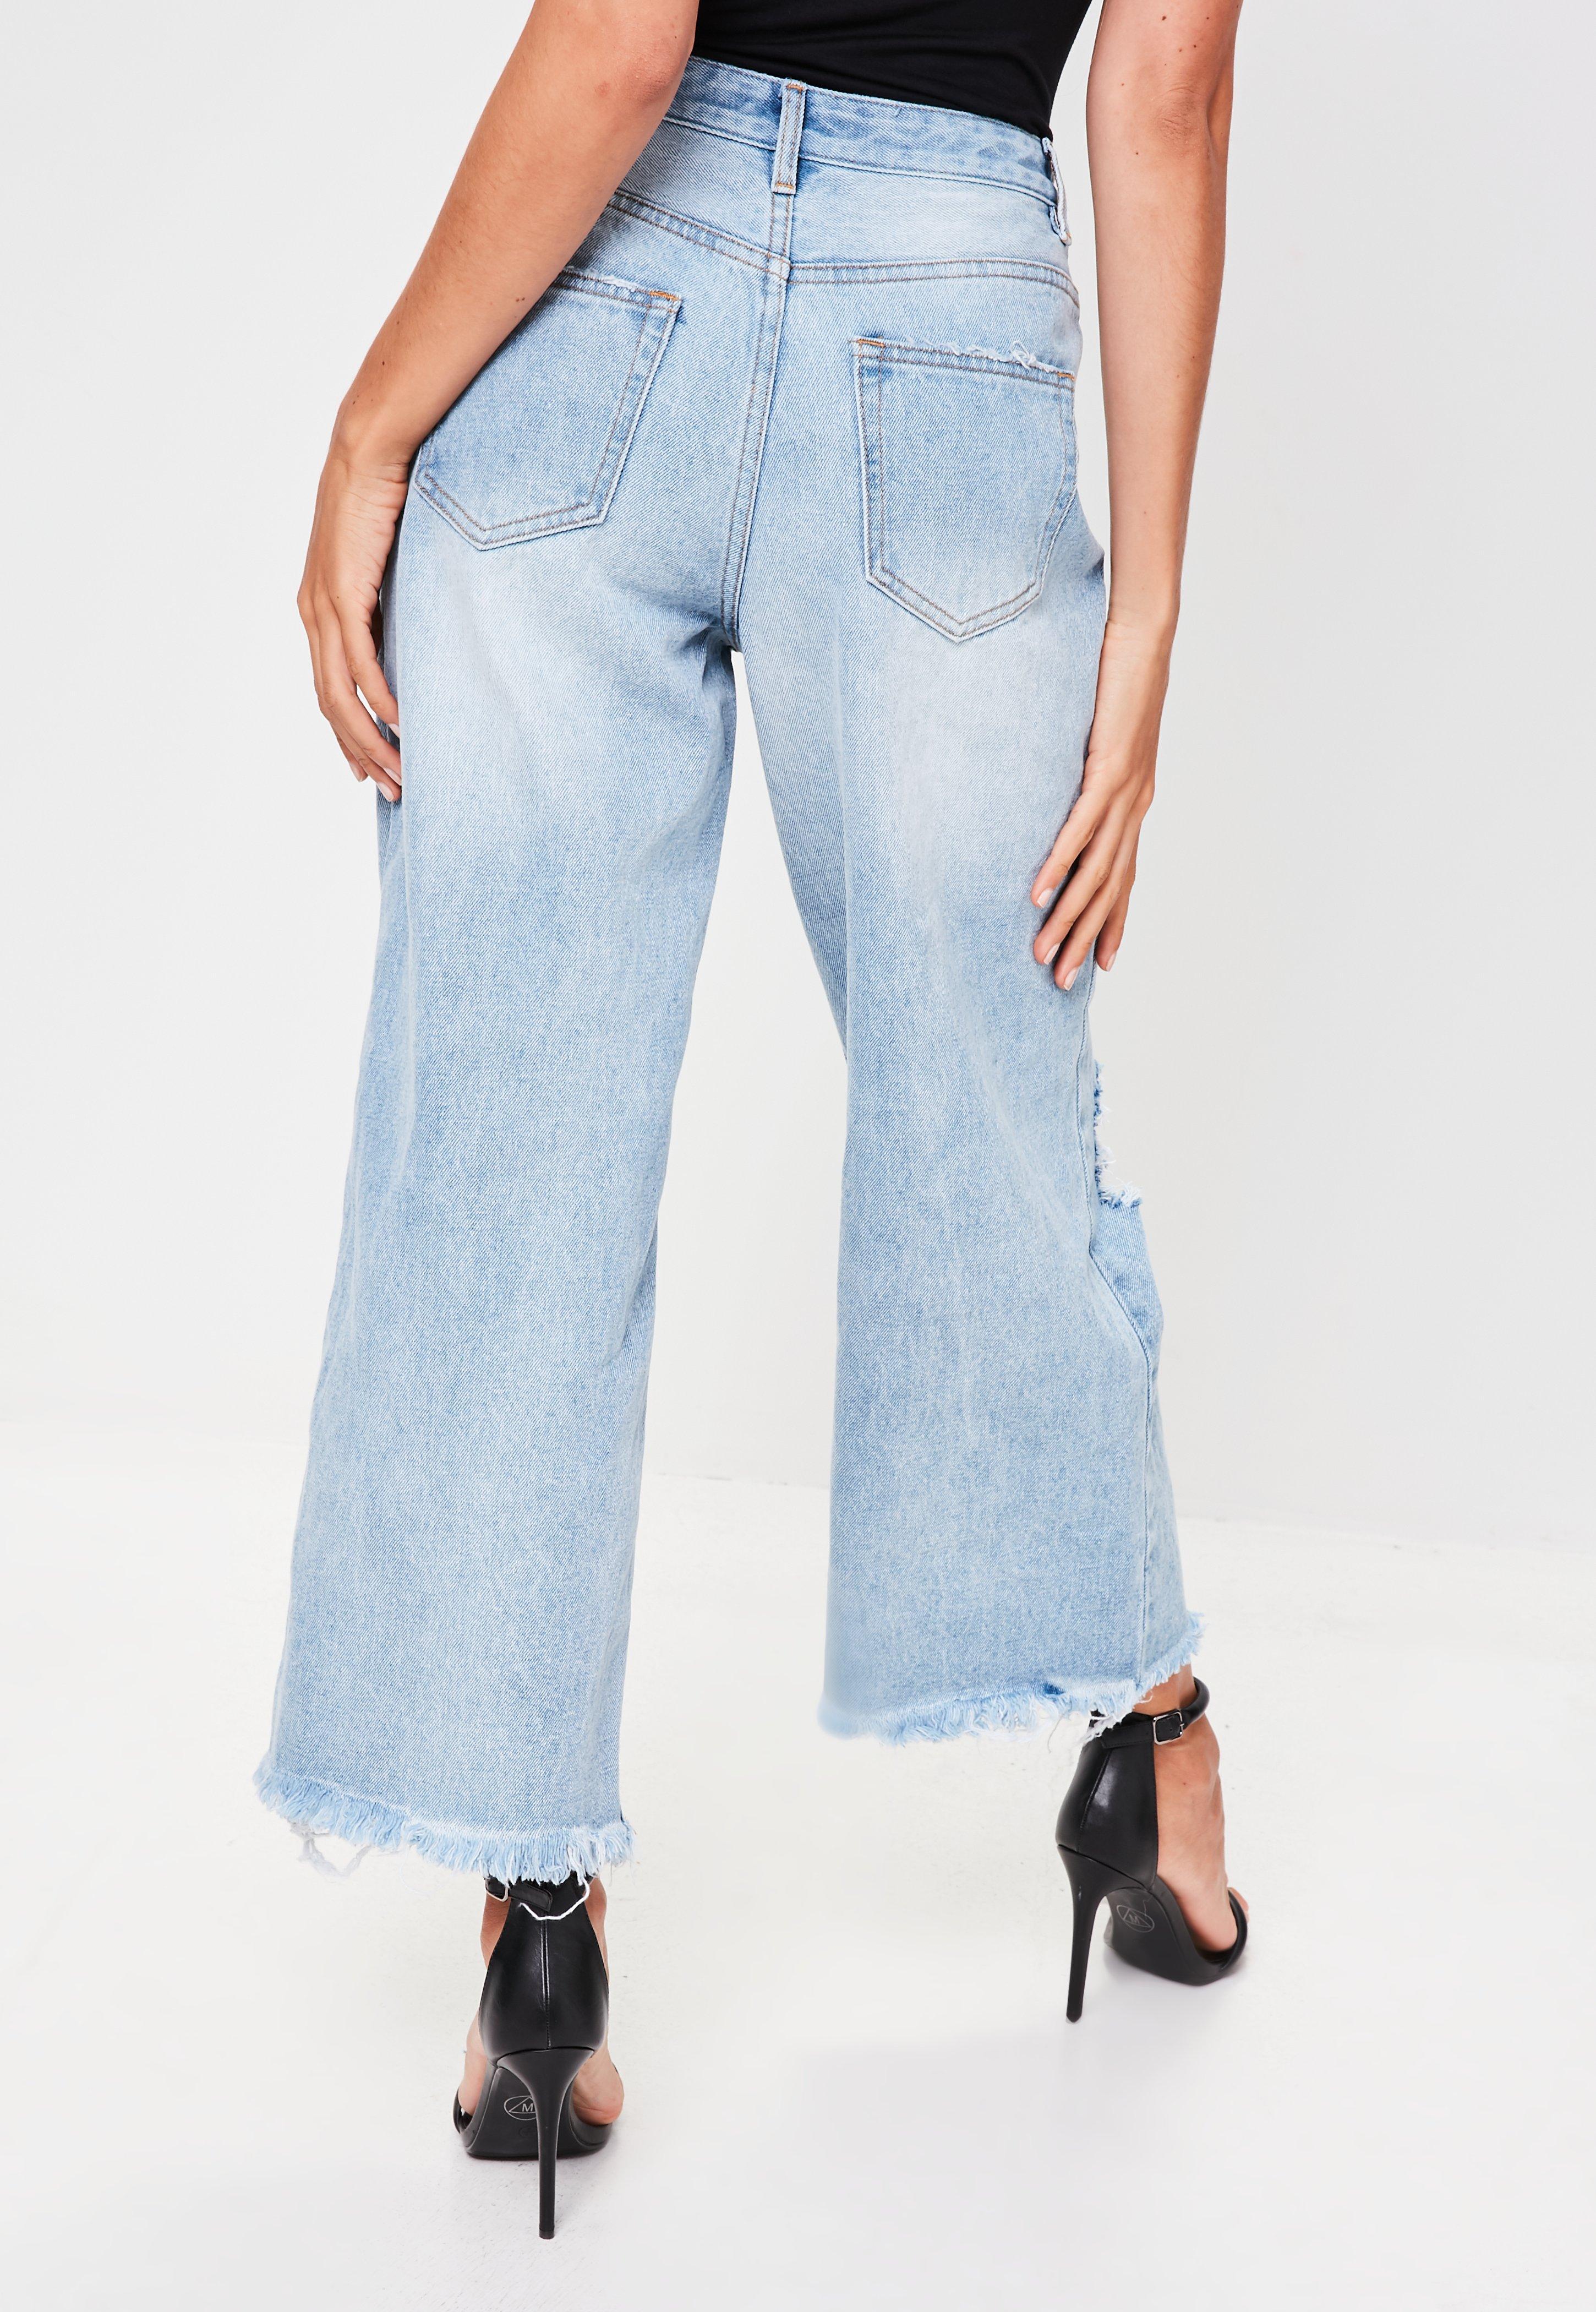 Lyst - Missguided Blue High Rise Ripped Wide Leg Jeans in Blue